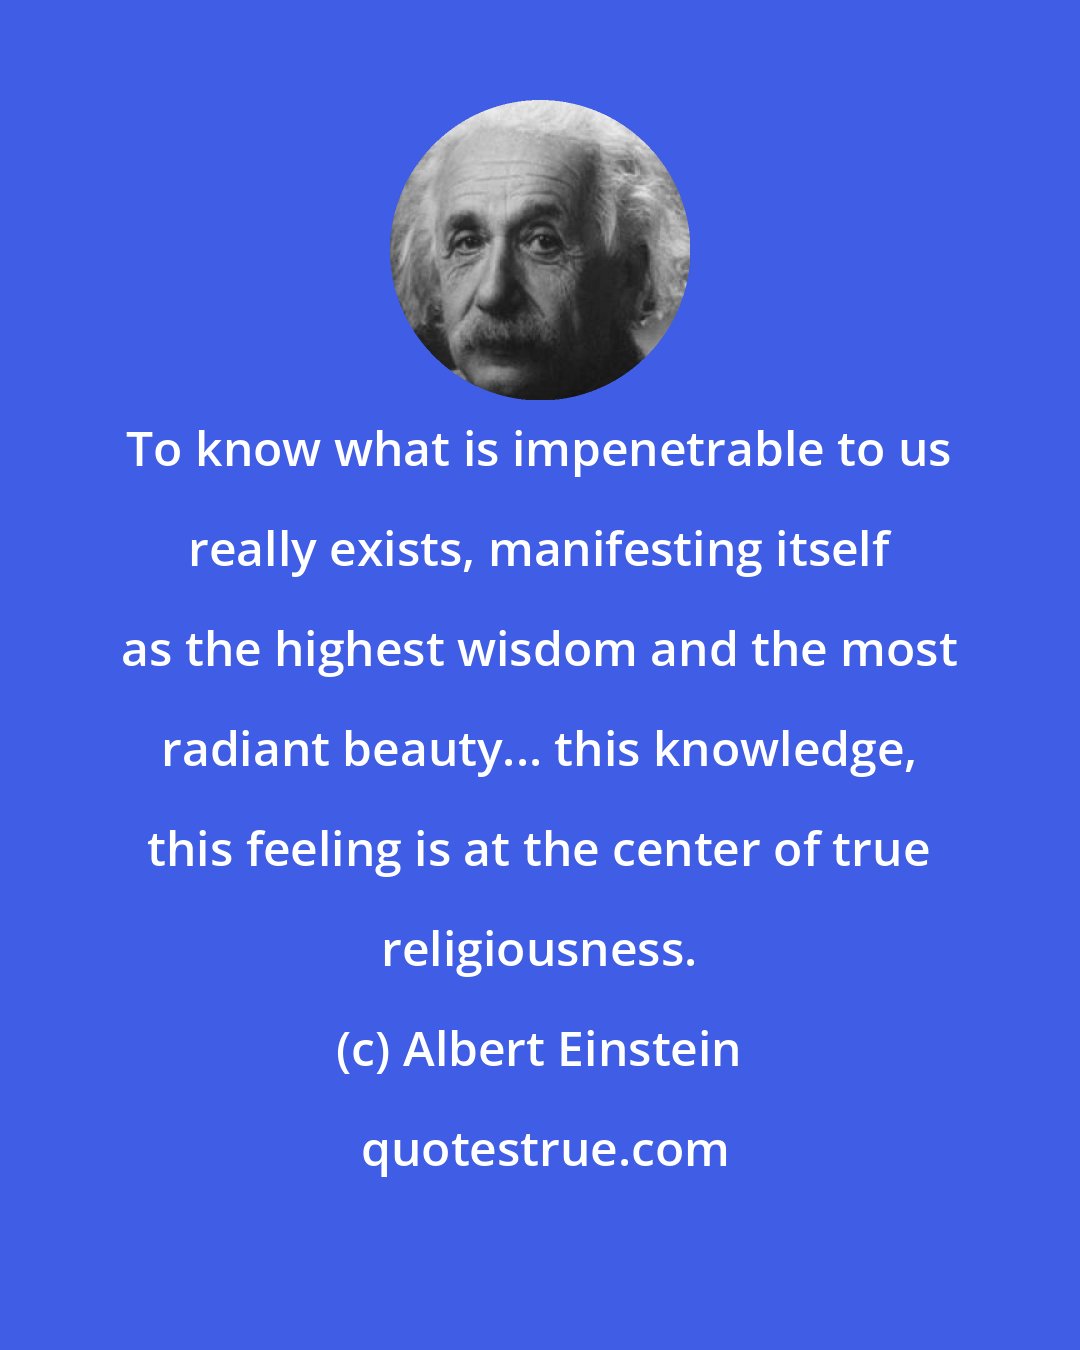 Albert Einstein: To know what is impenetrable to us really exists, manifesting itself as the highest wisdom and the most radiant beauty... this knowledge, this feeling is at the center of true religiousness.